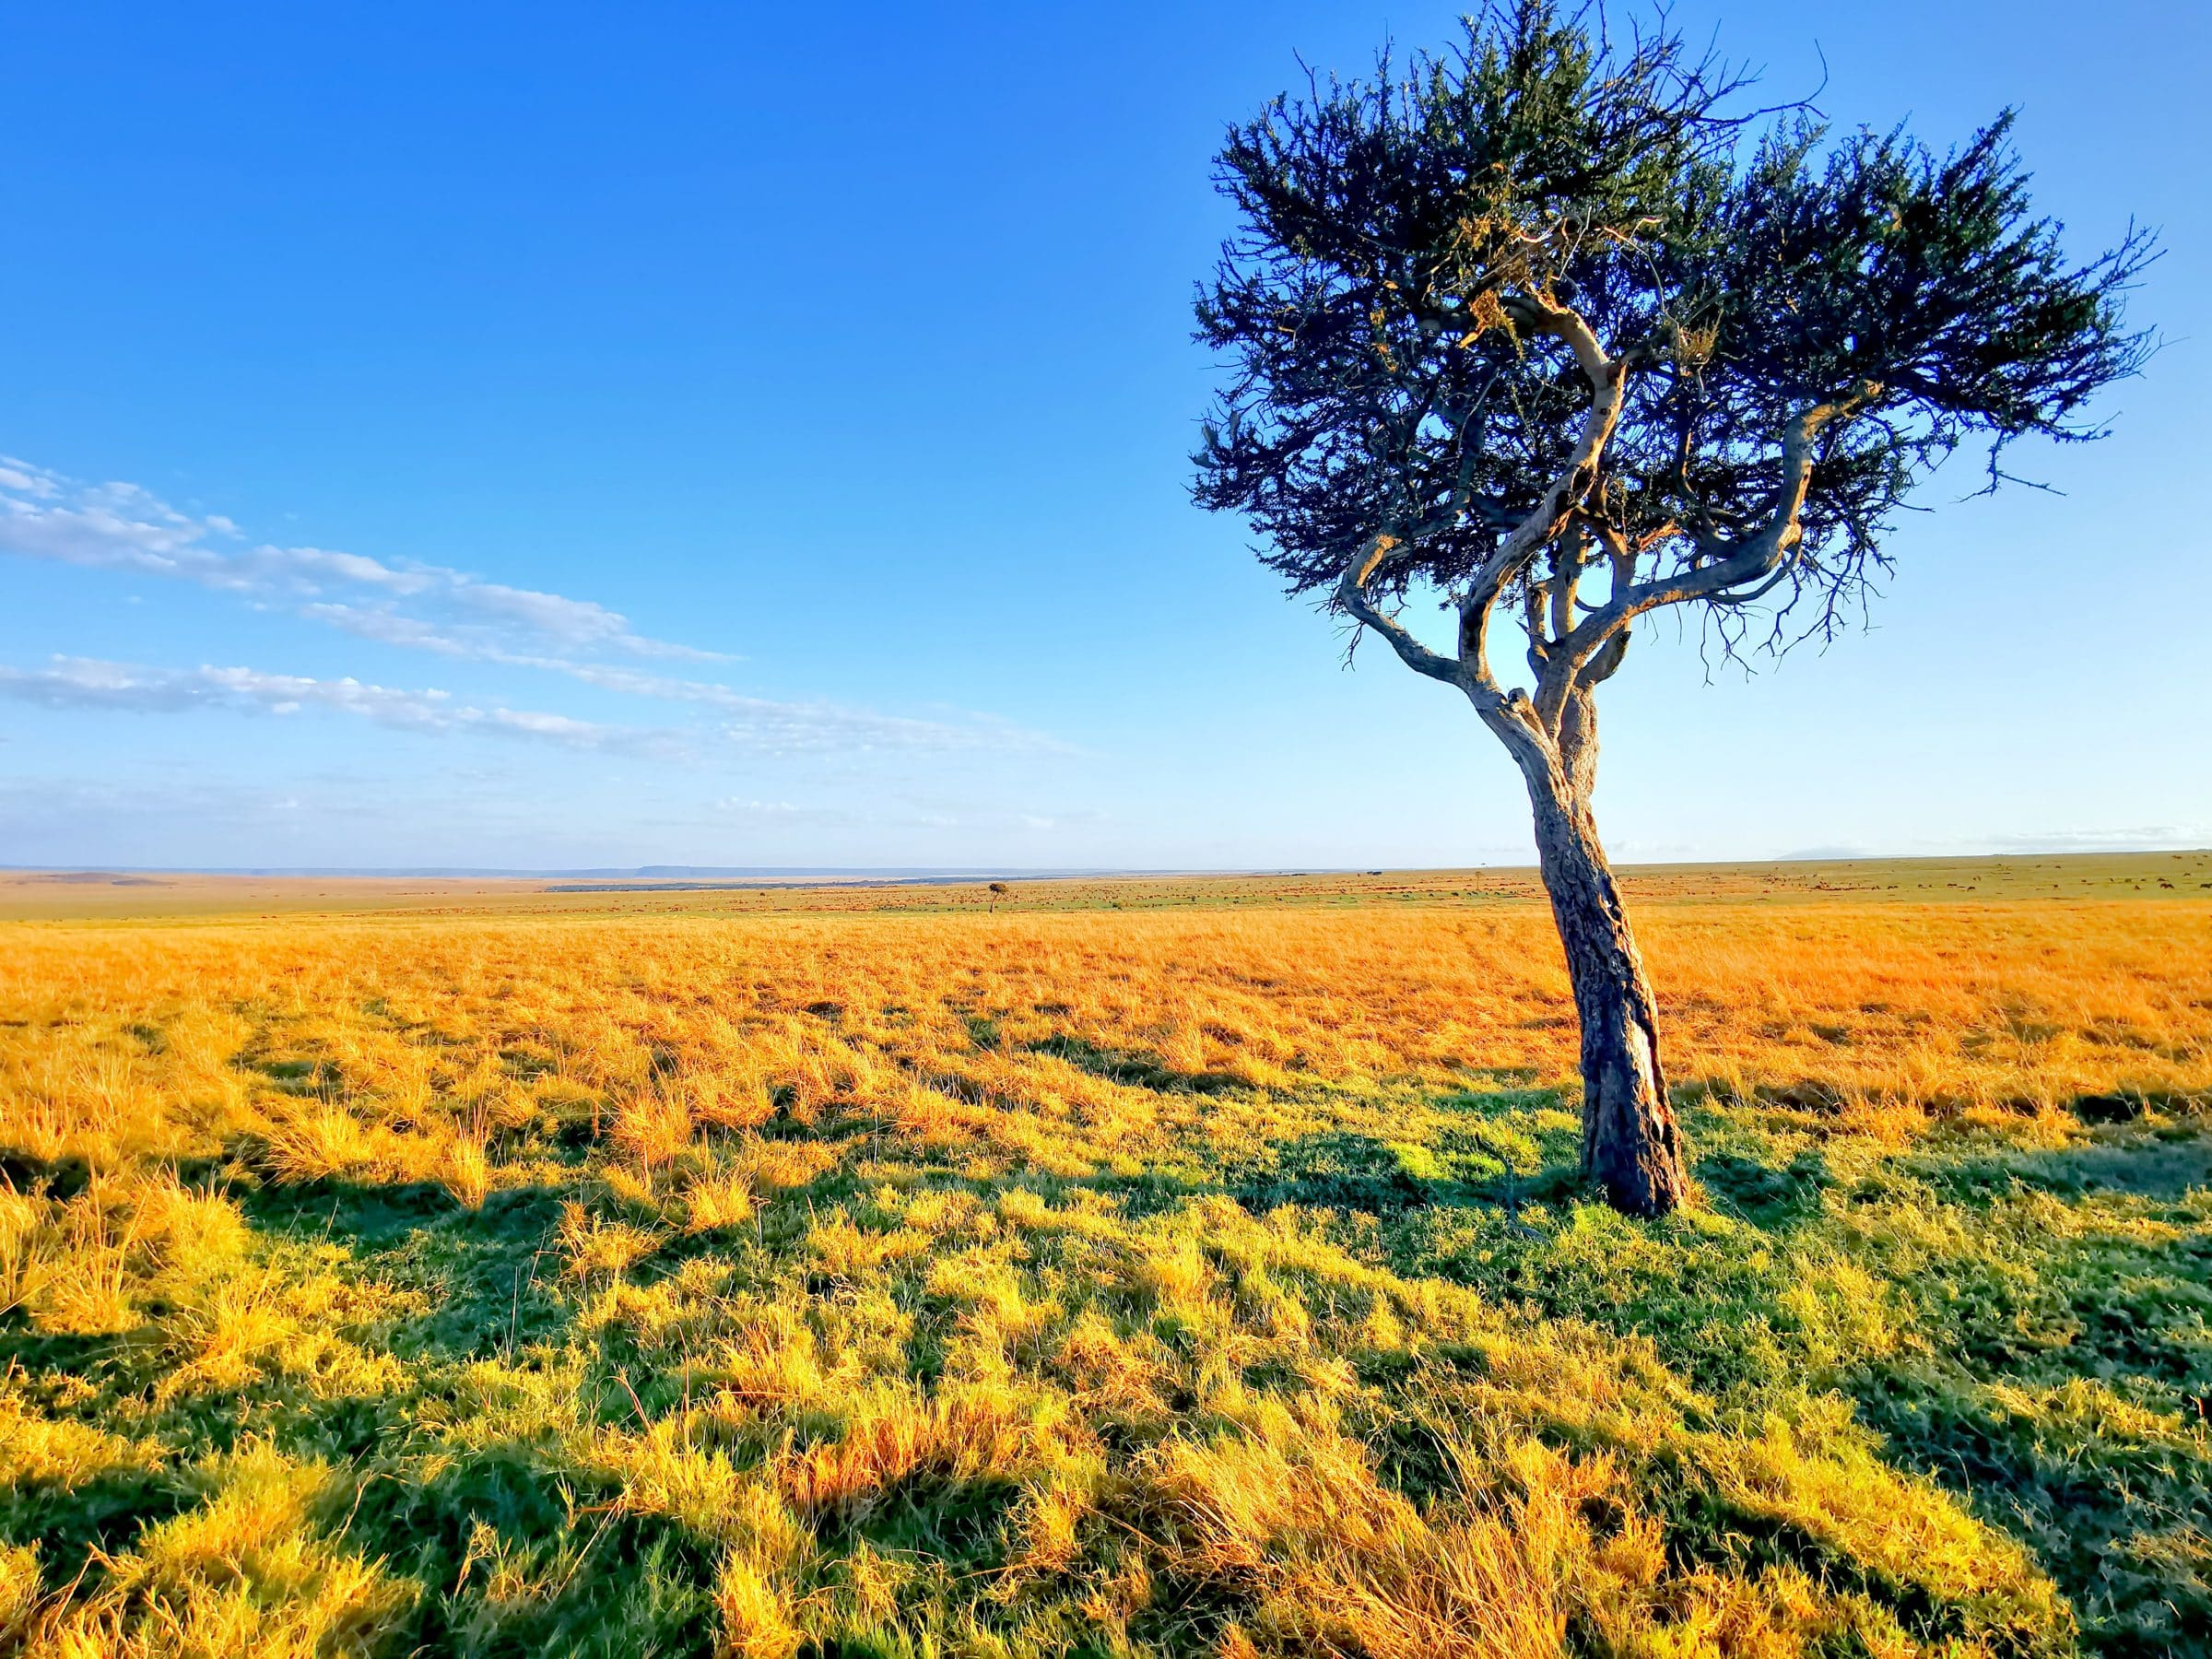 Great plains and a 'stray tree'. This is the image you often see in the Masai Mara and Serengeti